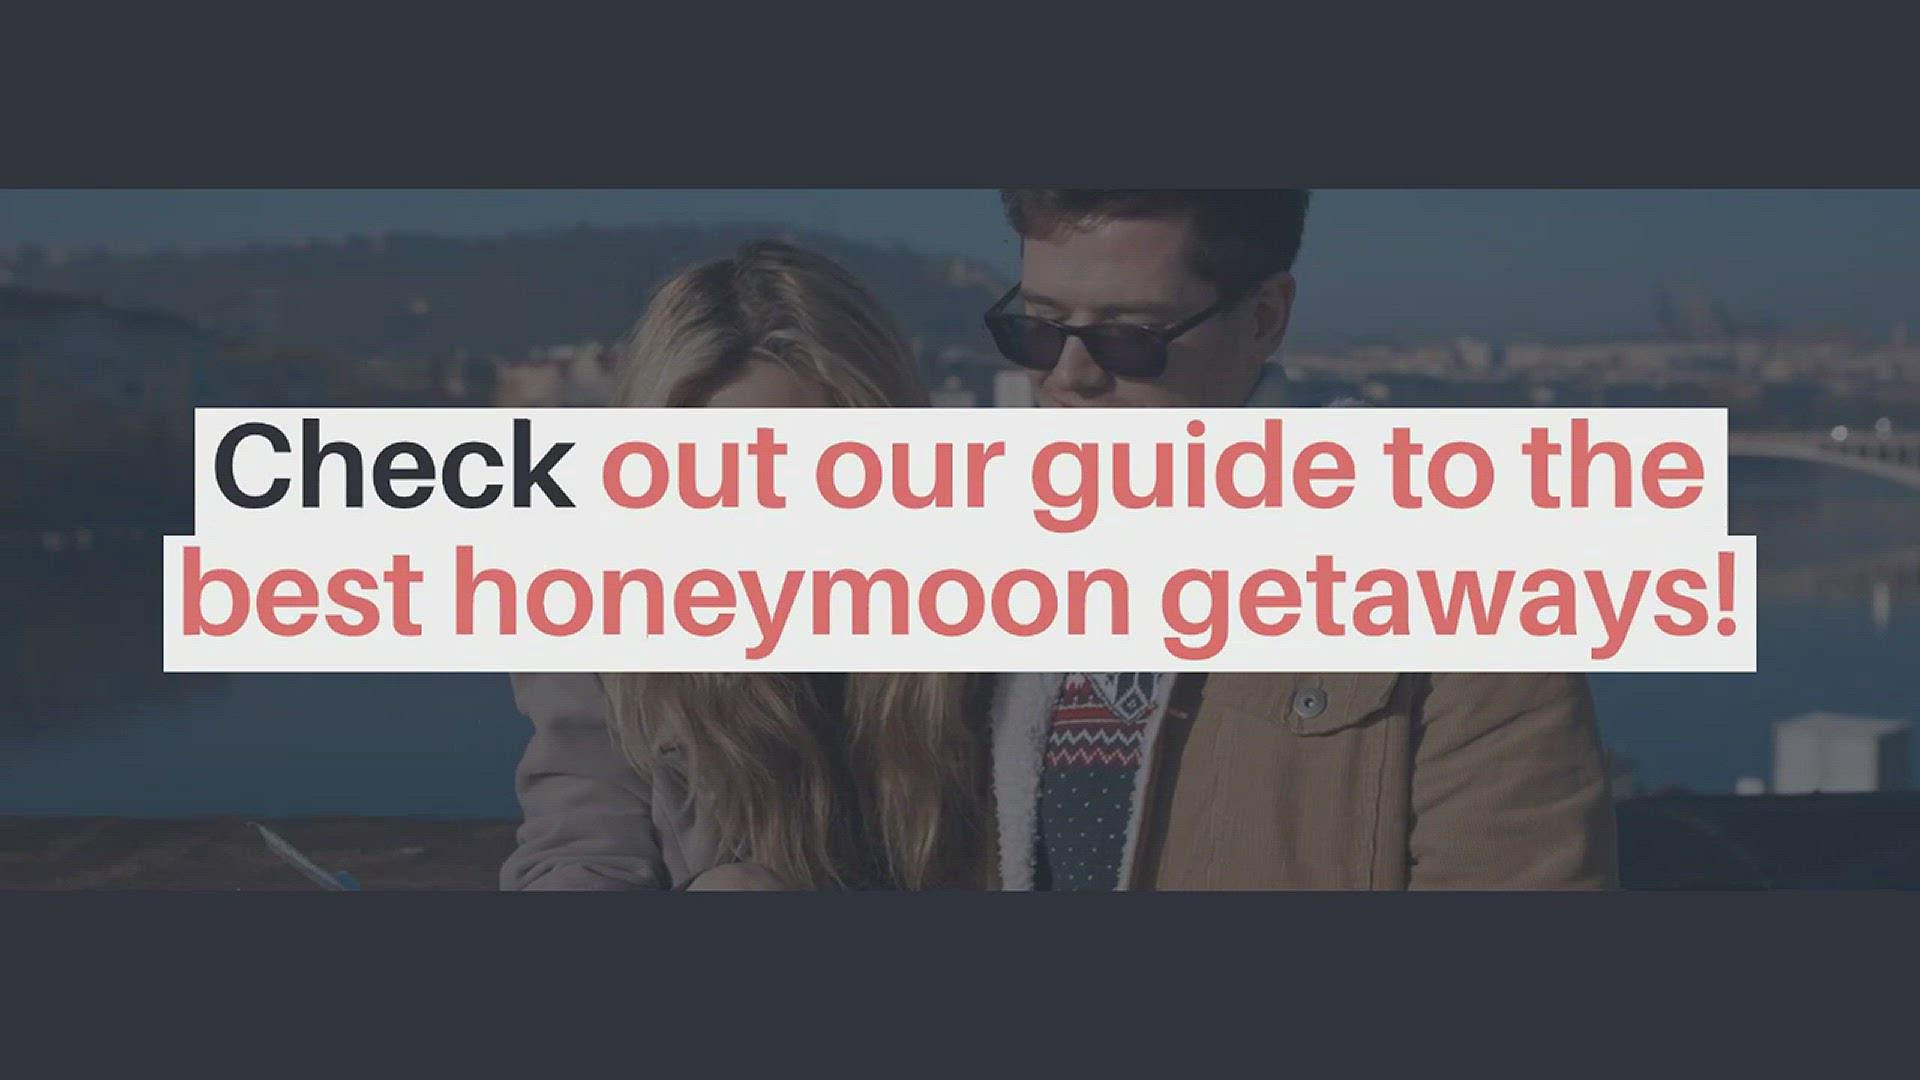 'Video thumbnail for Check out our guide to the best honeymoon getaways!'